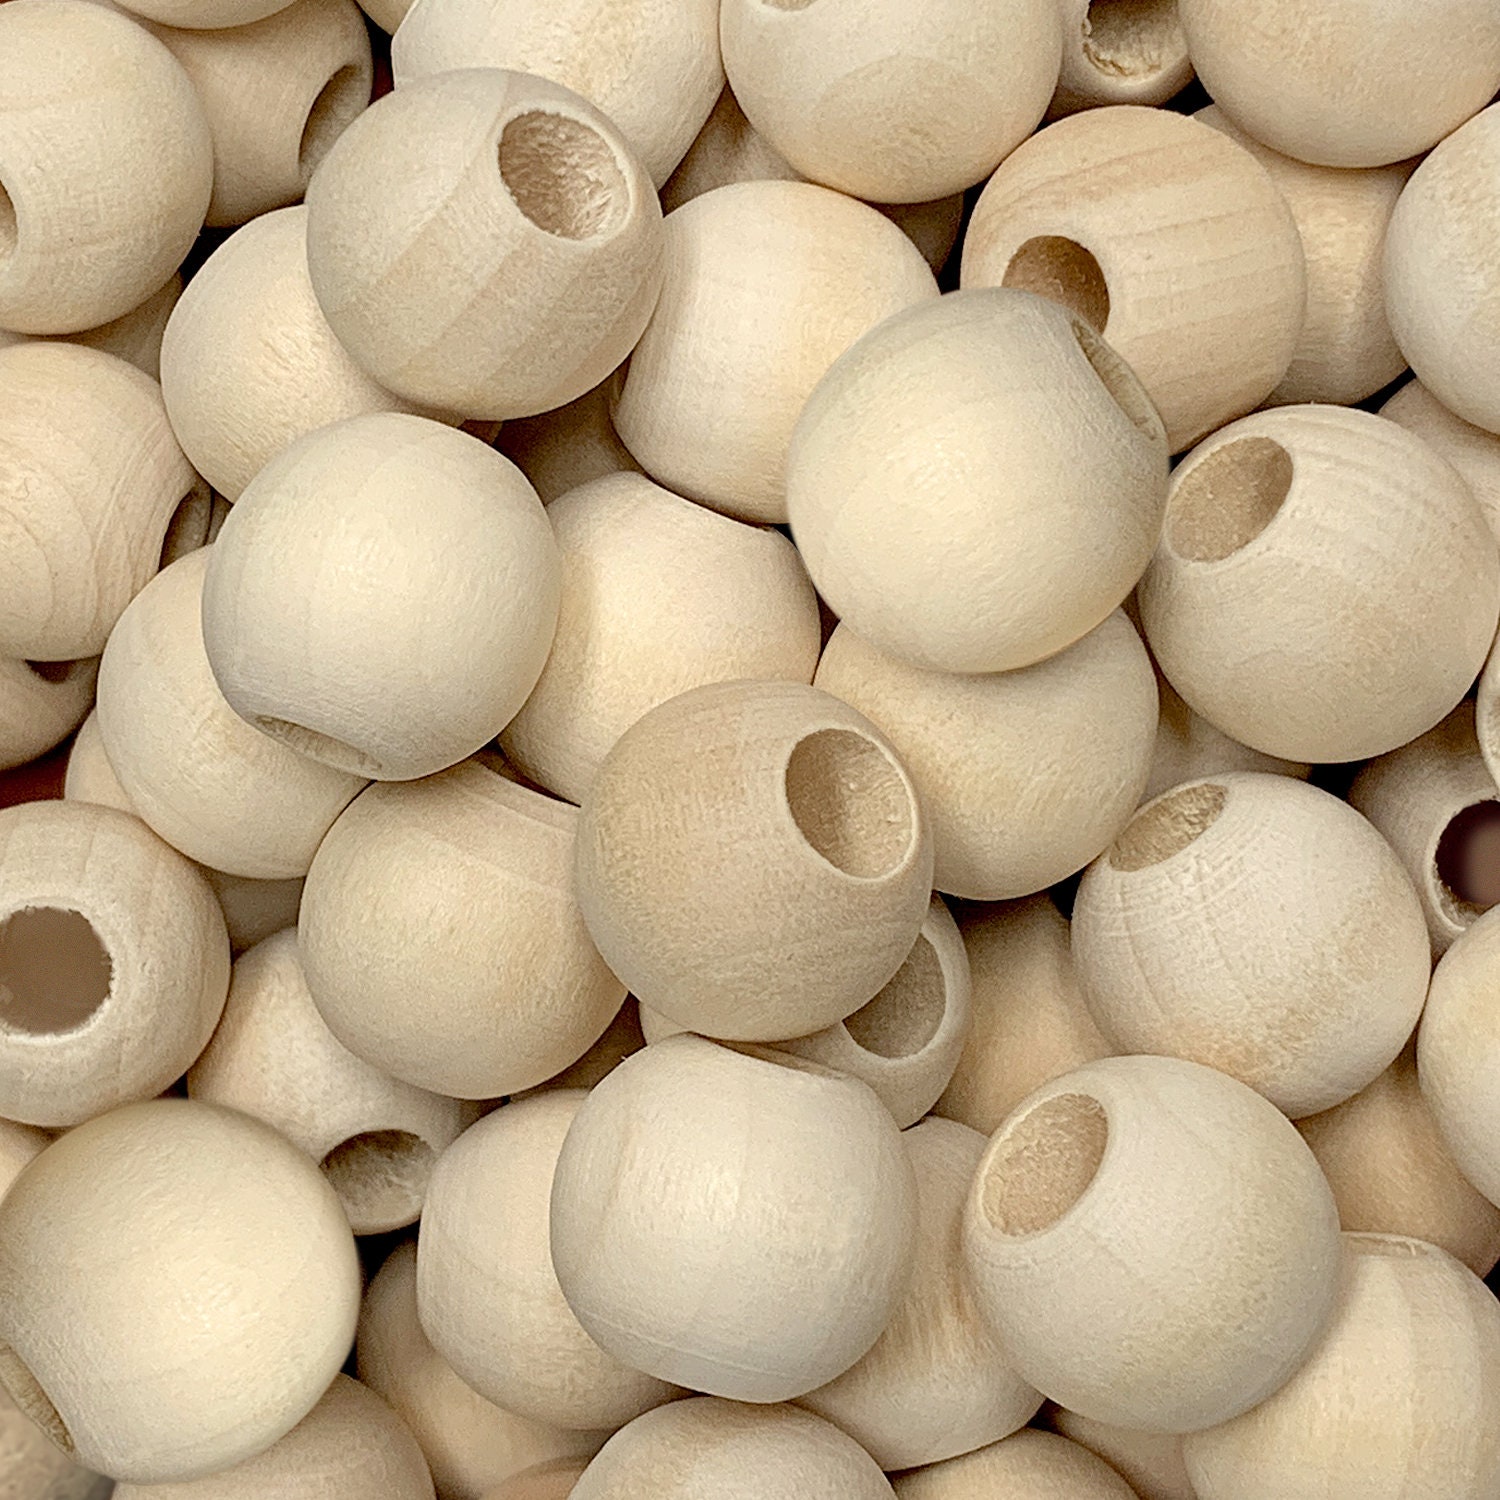 Incraftables Natural Wooden Beads for Crafts 530pcs (8mm, 10mm, 15mm, 20mm  & 25mm). Best Wood Beads for Crafts with Holes